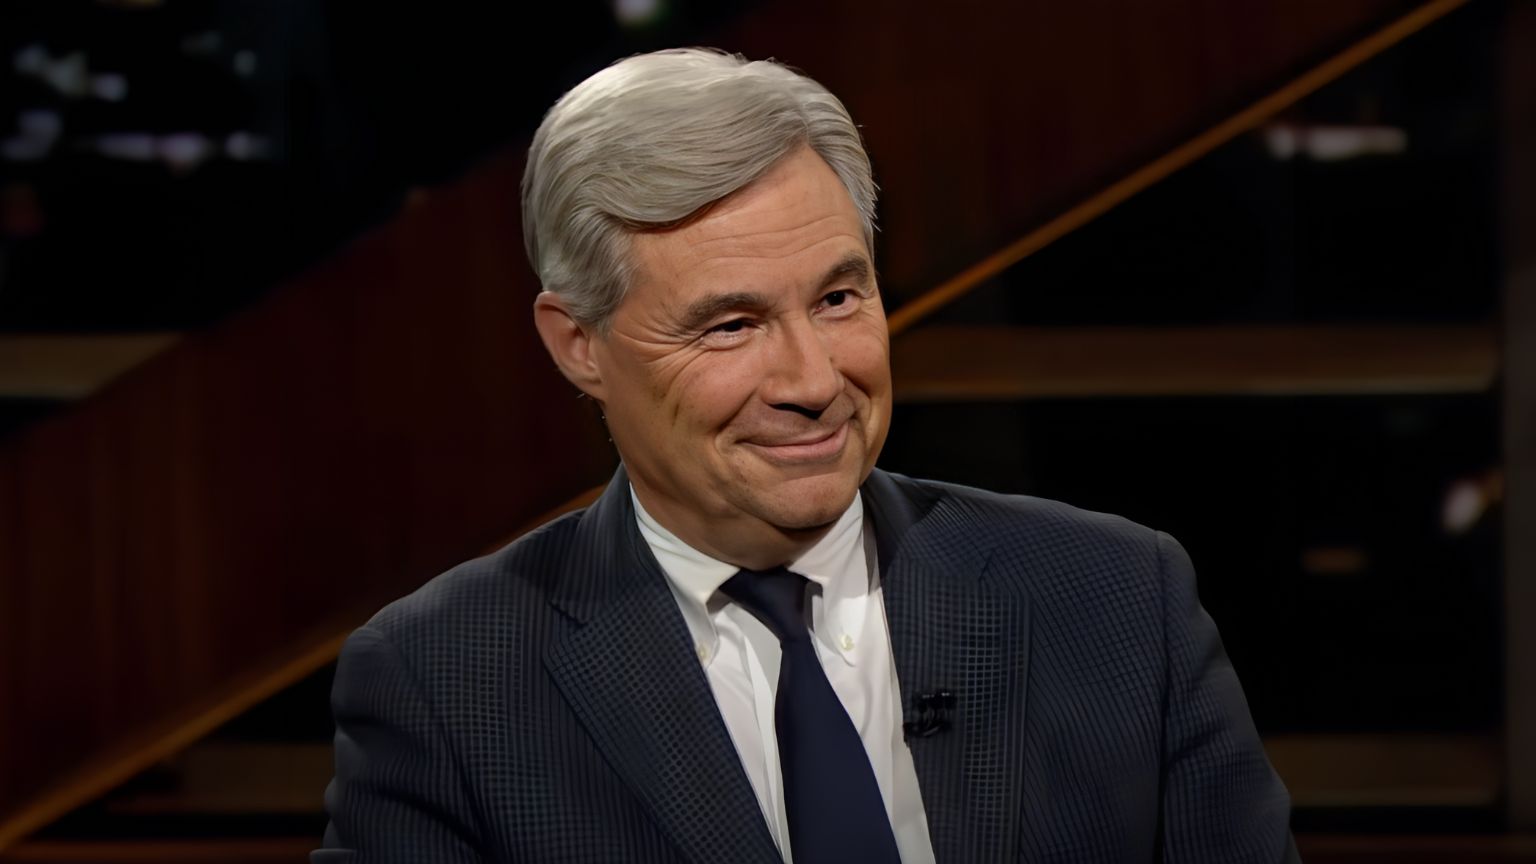 Senator Sheldon Whitehouse wants to repeal Section 230 to combat online “disinformation”